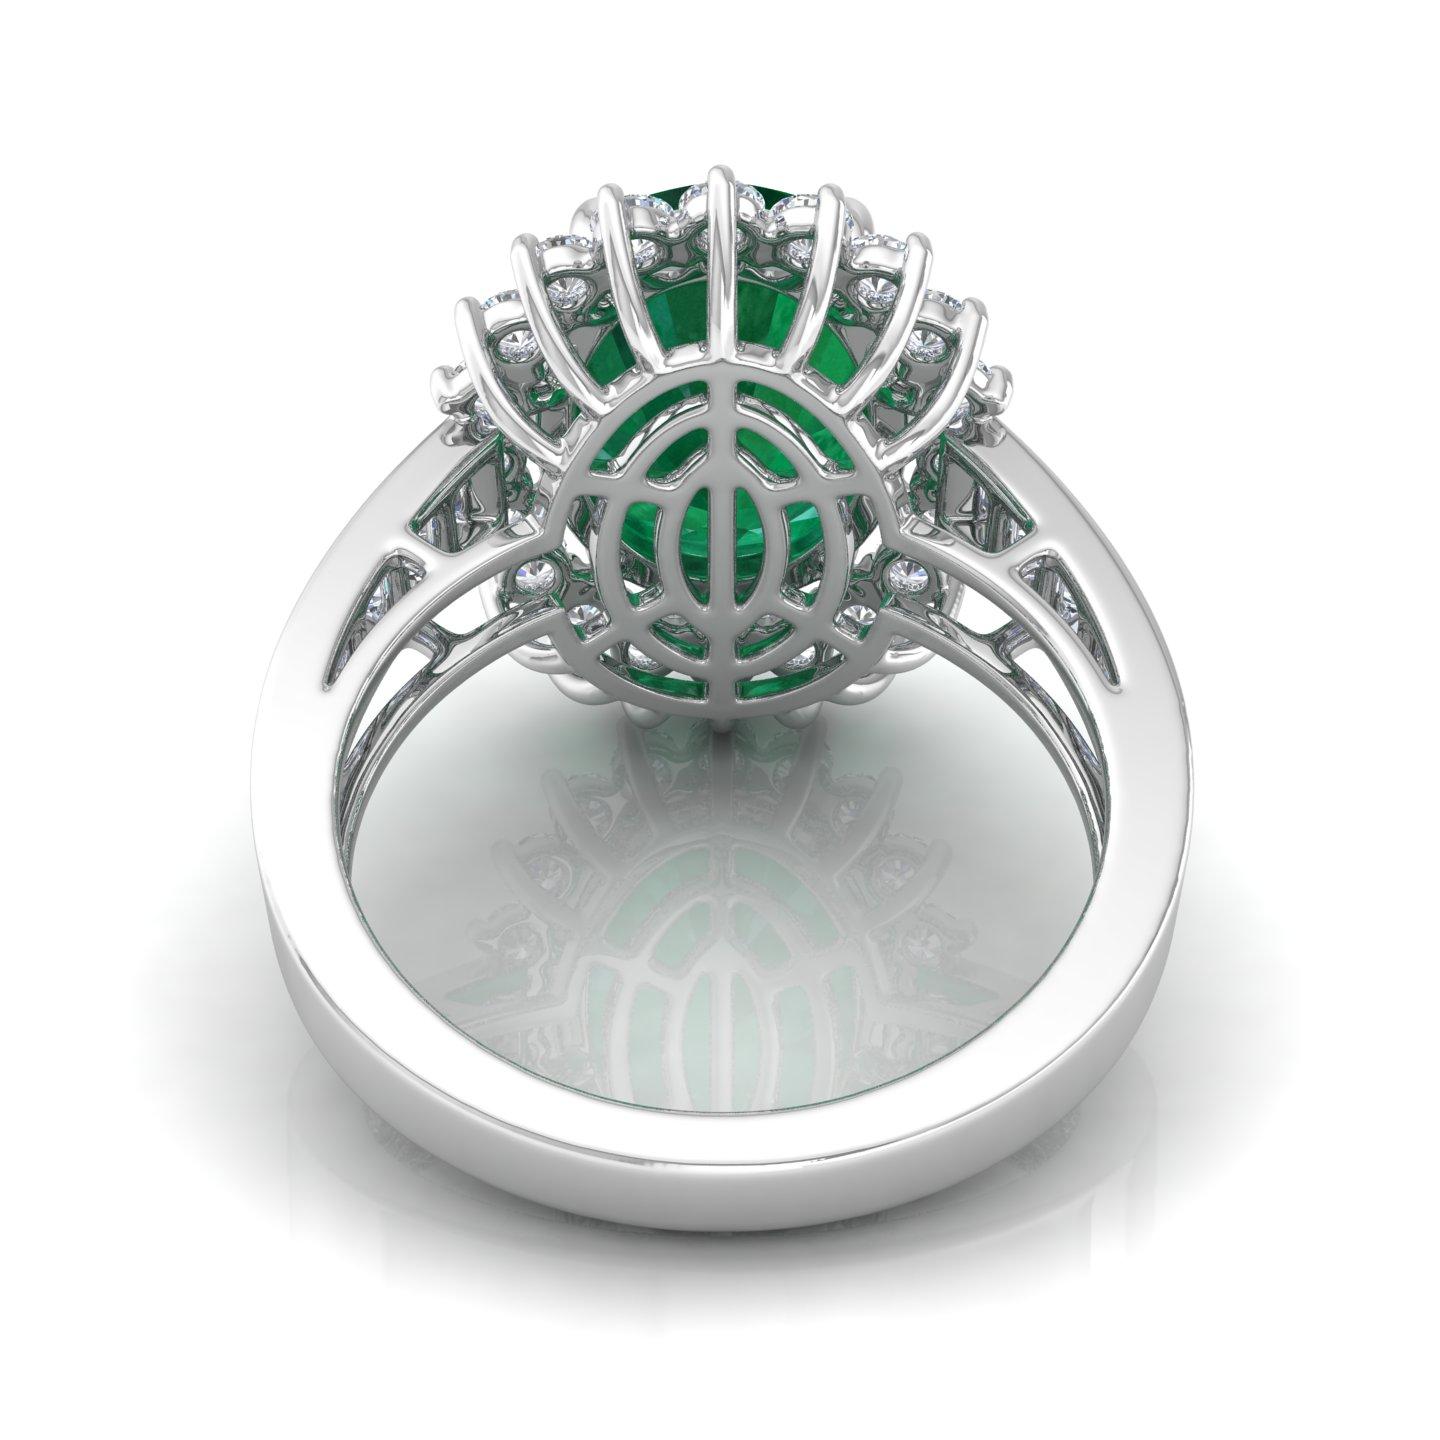 For Sale:  Oval Natural Emerald Gemstone Cocktail Ring Diamond 10 Karat White Gold Jewelry 8